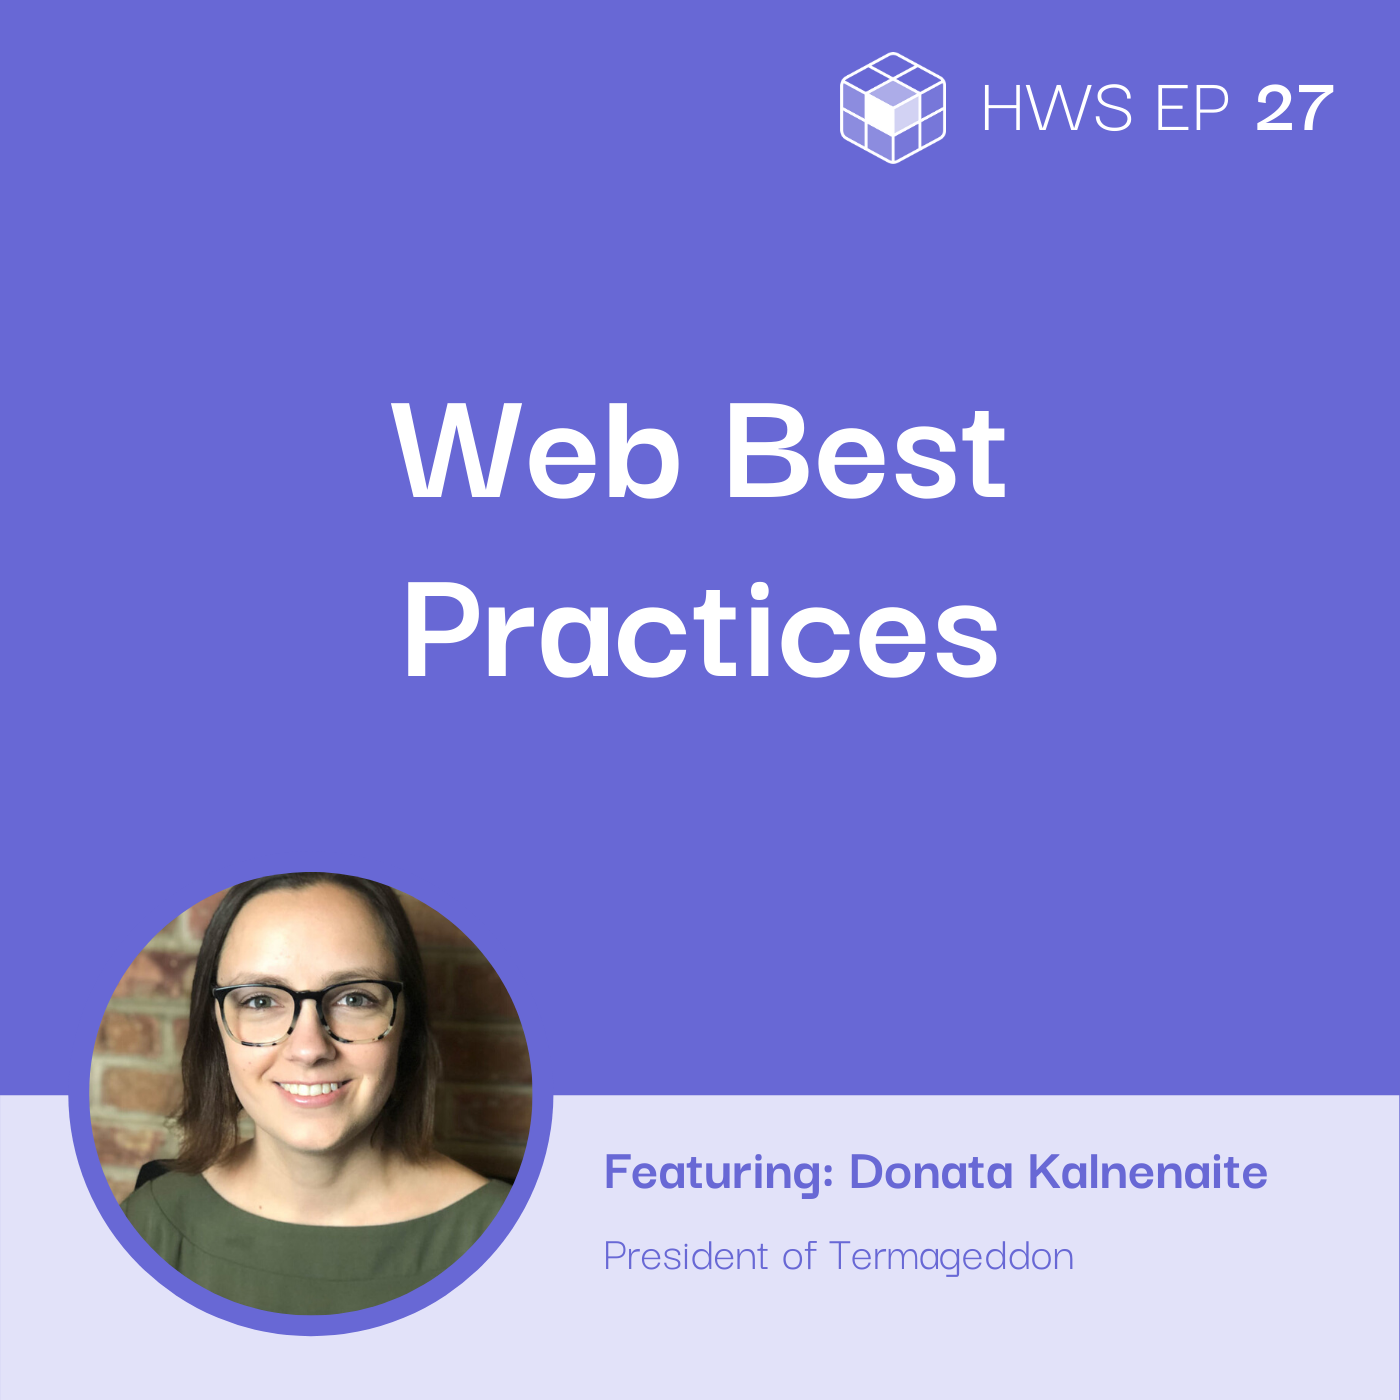 Donata Kalnenaite from Termageddon shares how to solve the issue of constantly having to update your privacy policy